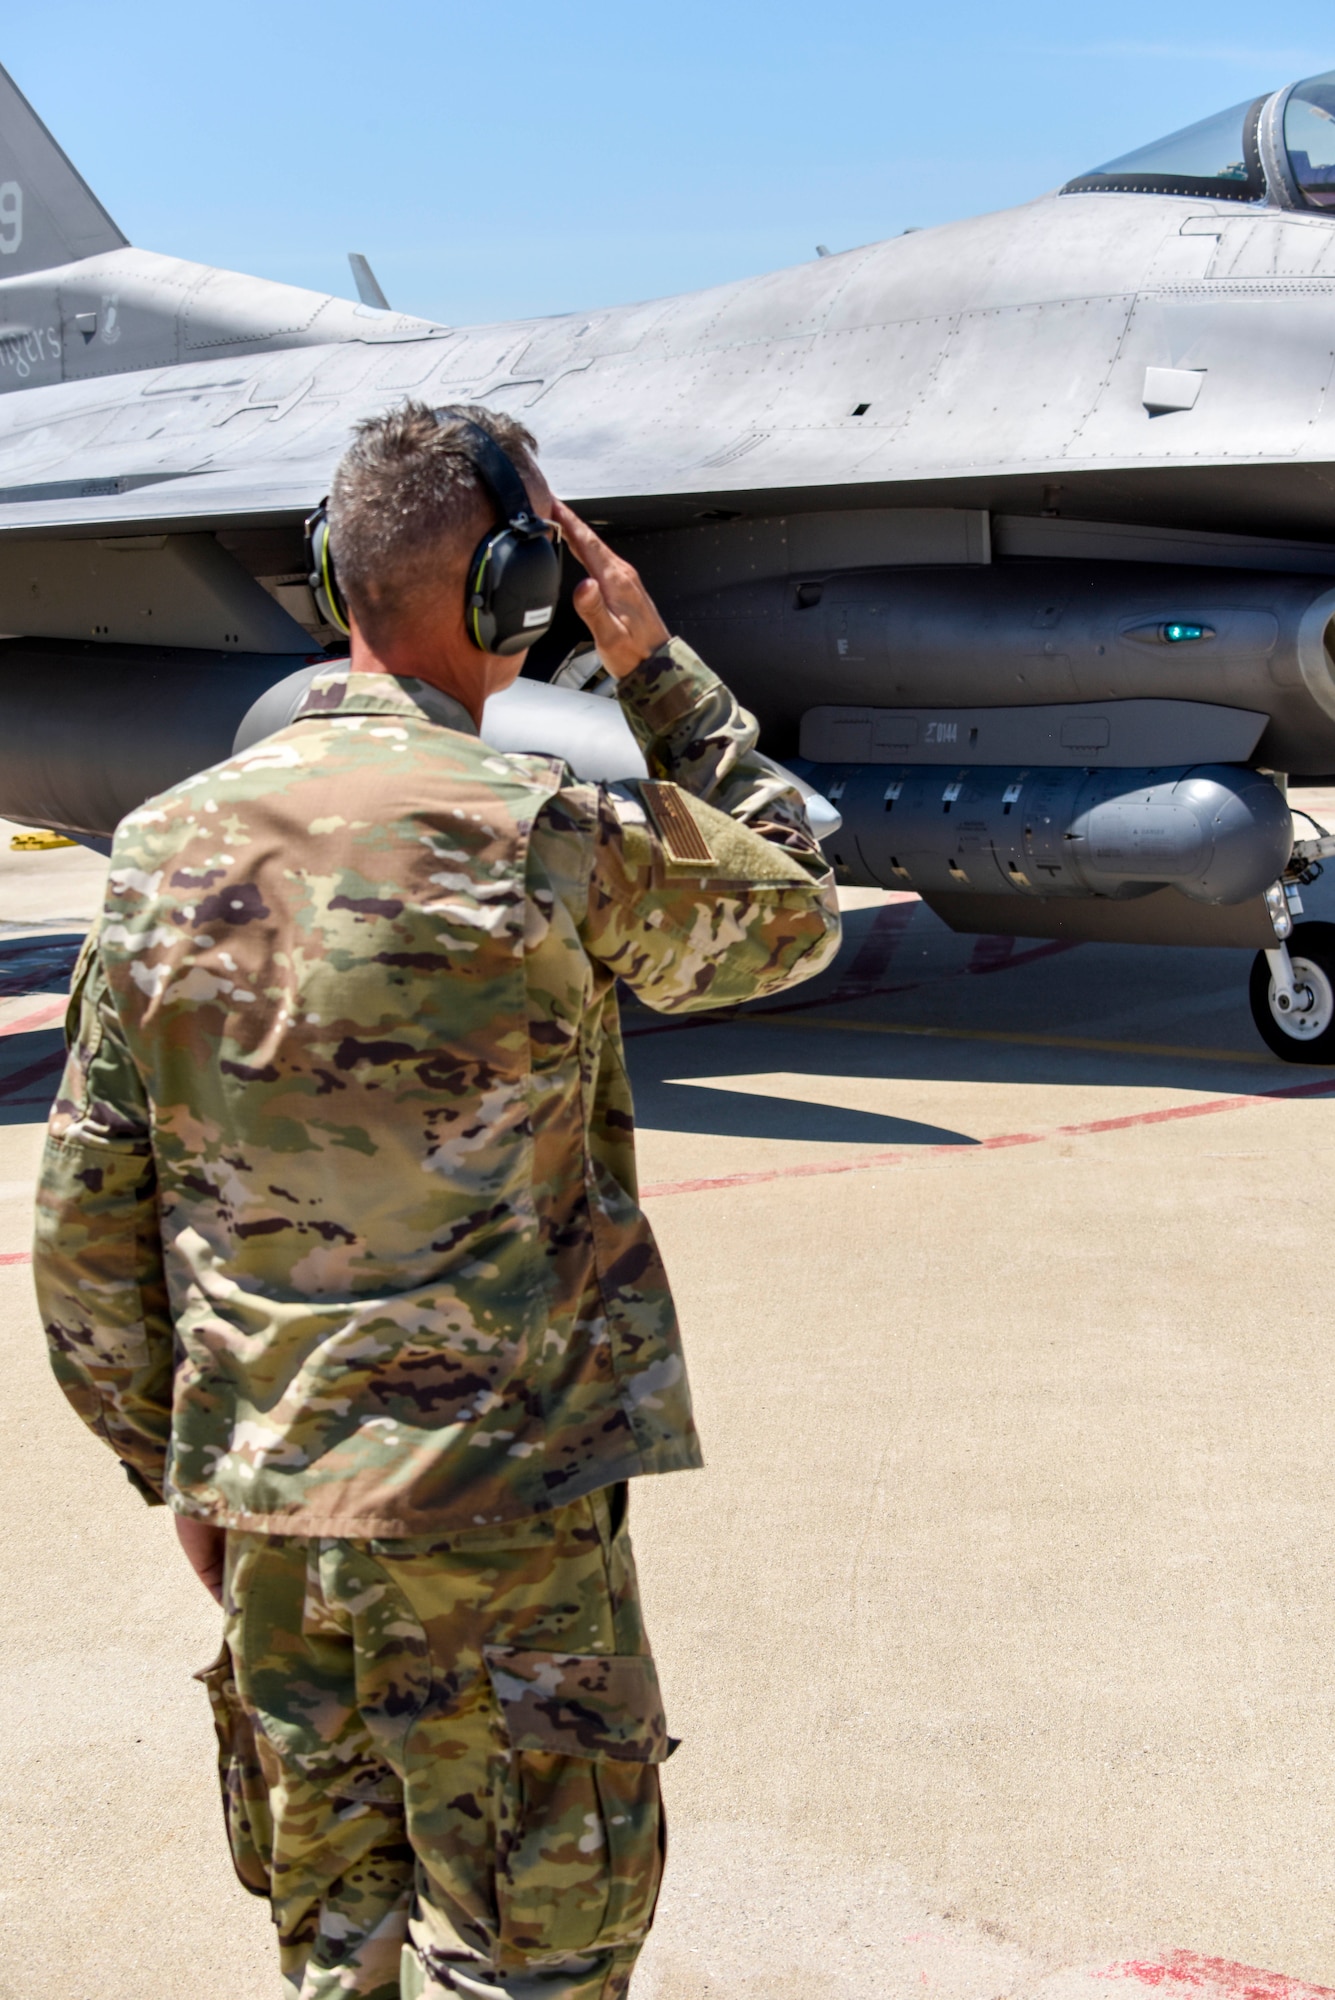 U.S. Air Force Master Sgt. Terry Copic, a crew chief assigned to the 113th Wing, D.C. Air National Guard, launches an F-16 Fighting Falcon, assigned to the Ohio National Guard’s 180th Fighter Wing, piloted by his nephew, 1st Lt. T.J. Copic, an F-16 fighter pilot assigned to the 180FW, for a training flight at the 180FW in Swanton, Ohio, June 30, 2020.